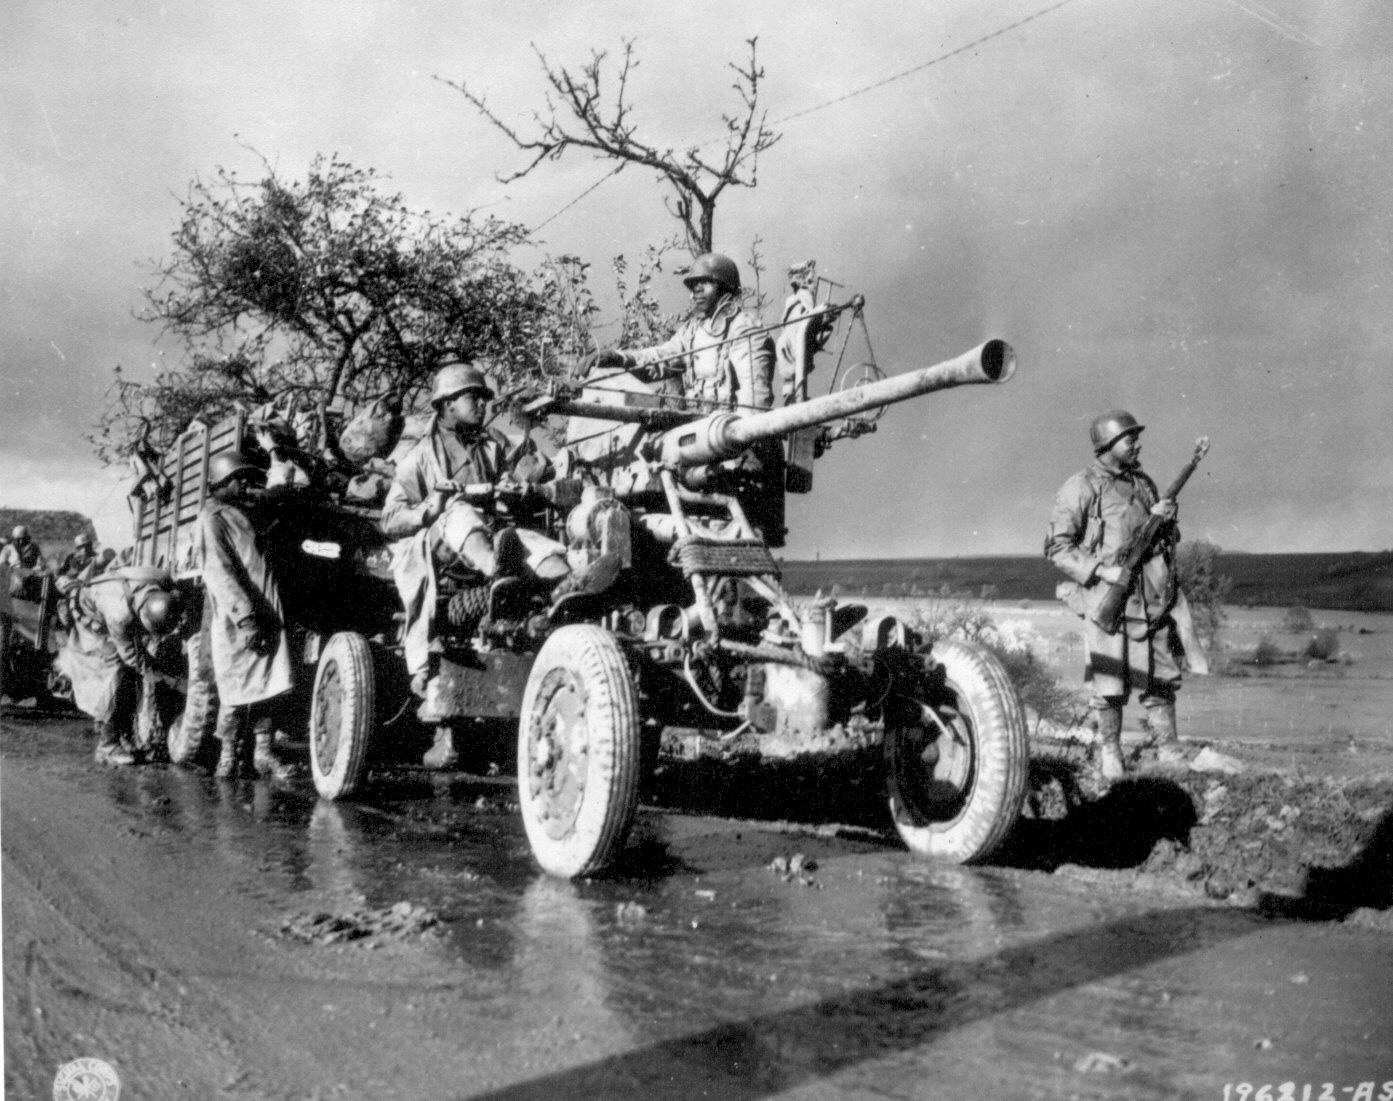 African-American soldiers of Battery A, 4520th Anti-Aircraft stood by and checked their equipment while the convoy took a break, 9 Nov 1944